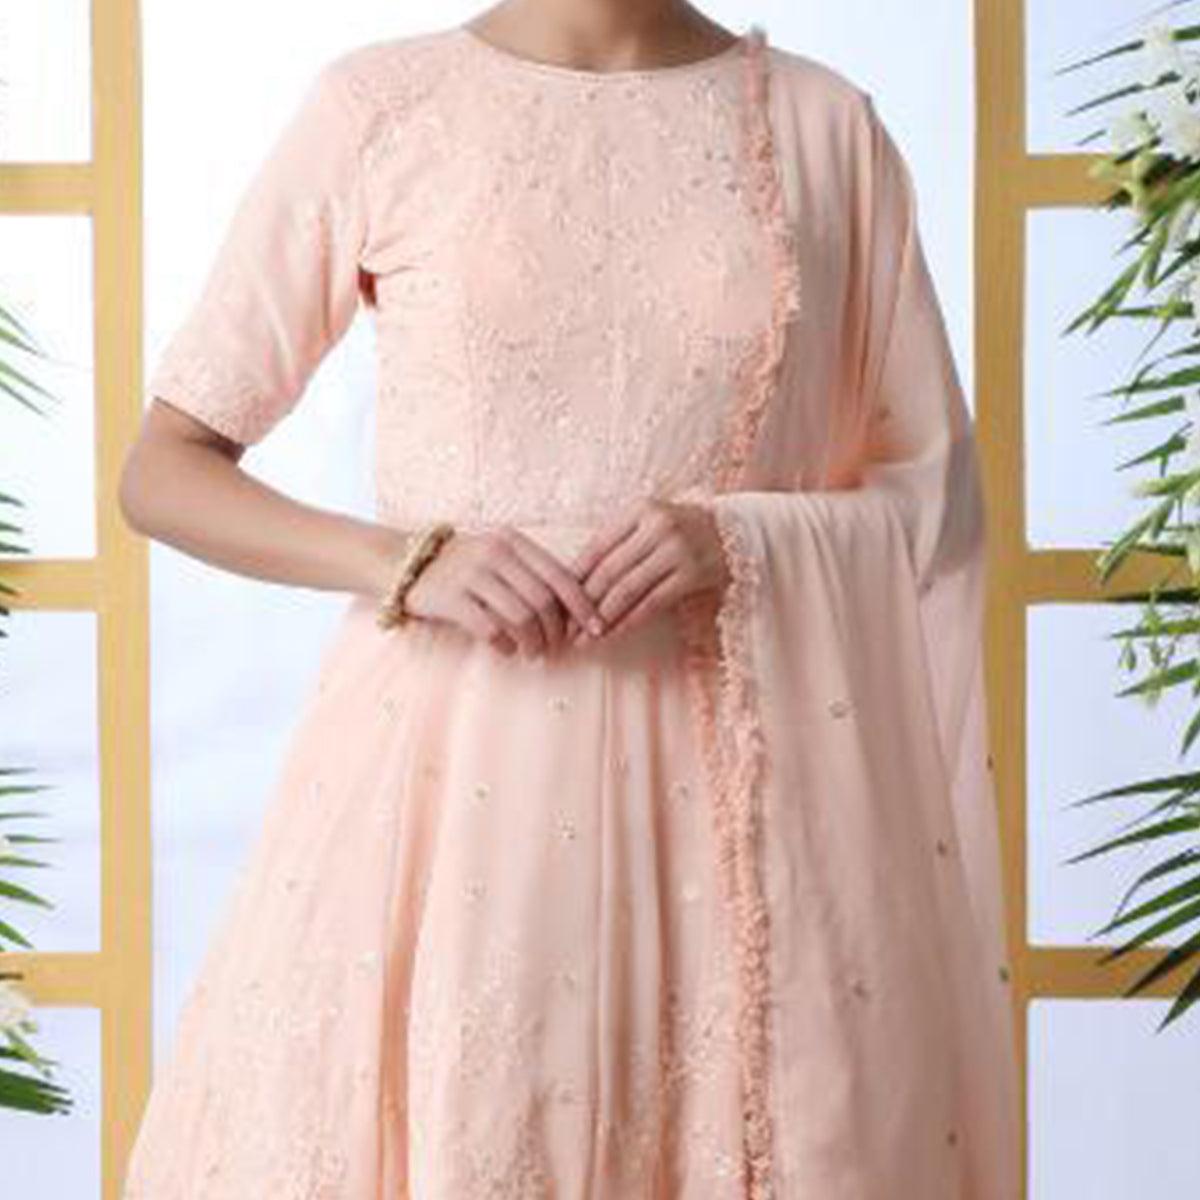 Classy Peach Colored Party Wear Embroidered Georgette Palazzo Suit - Peachmode